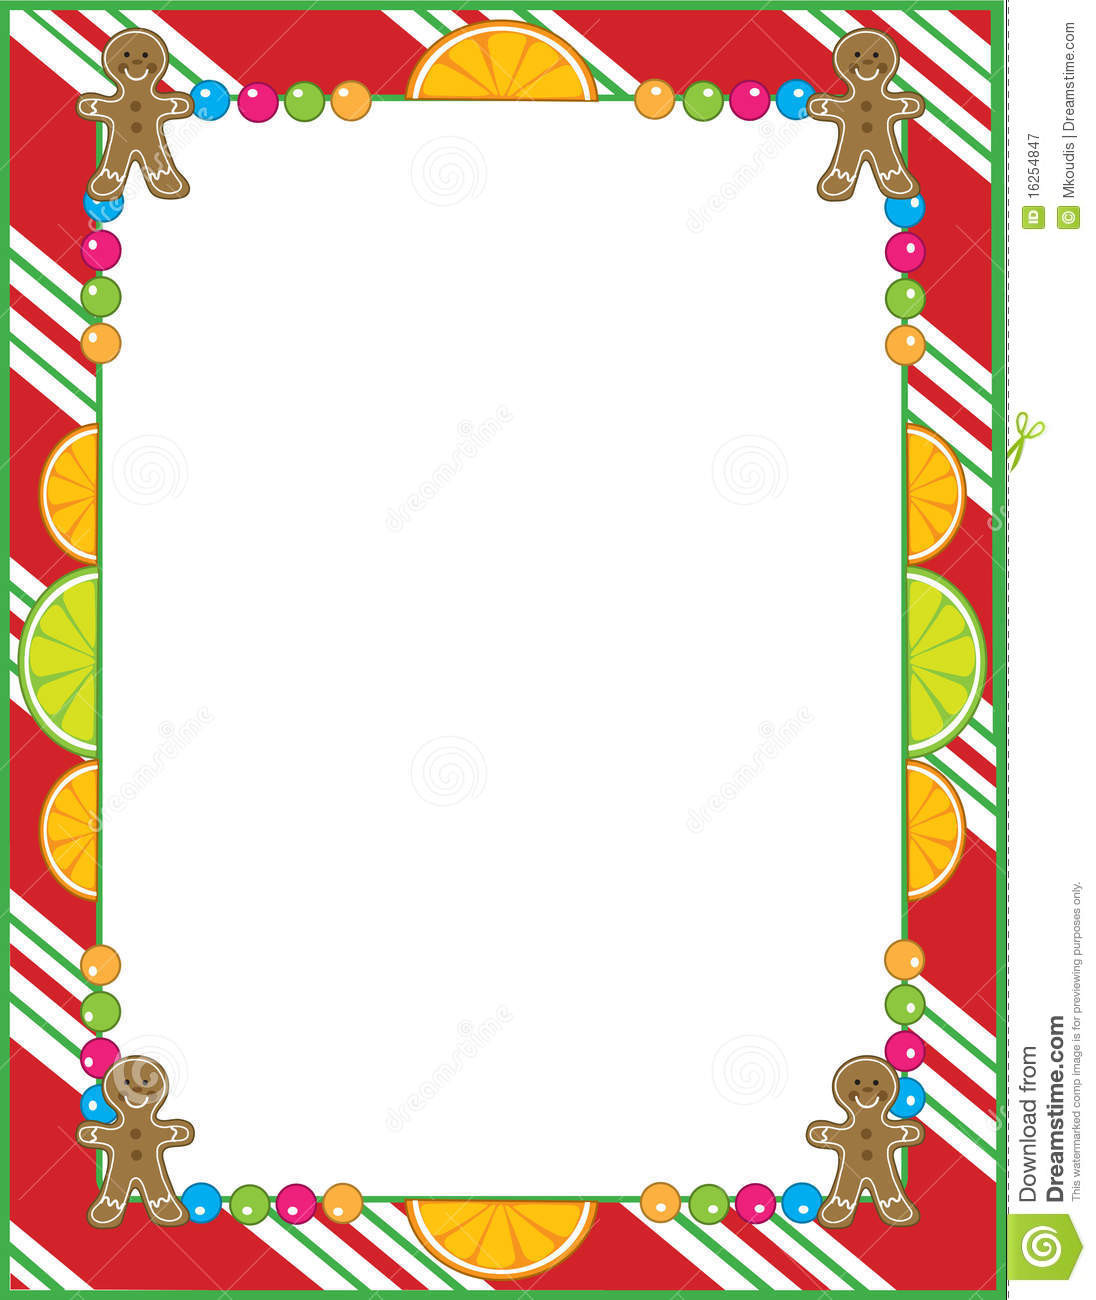 Christmas Candy Border
 Christmas Candy Border Royalty Free Stock graphy